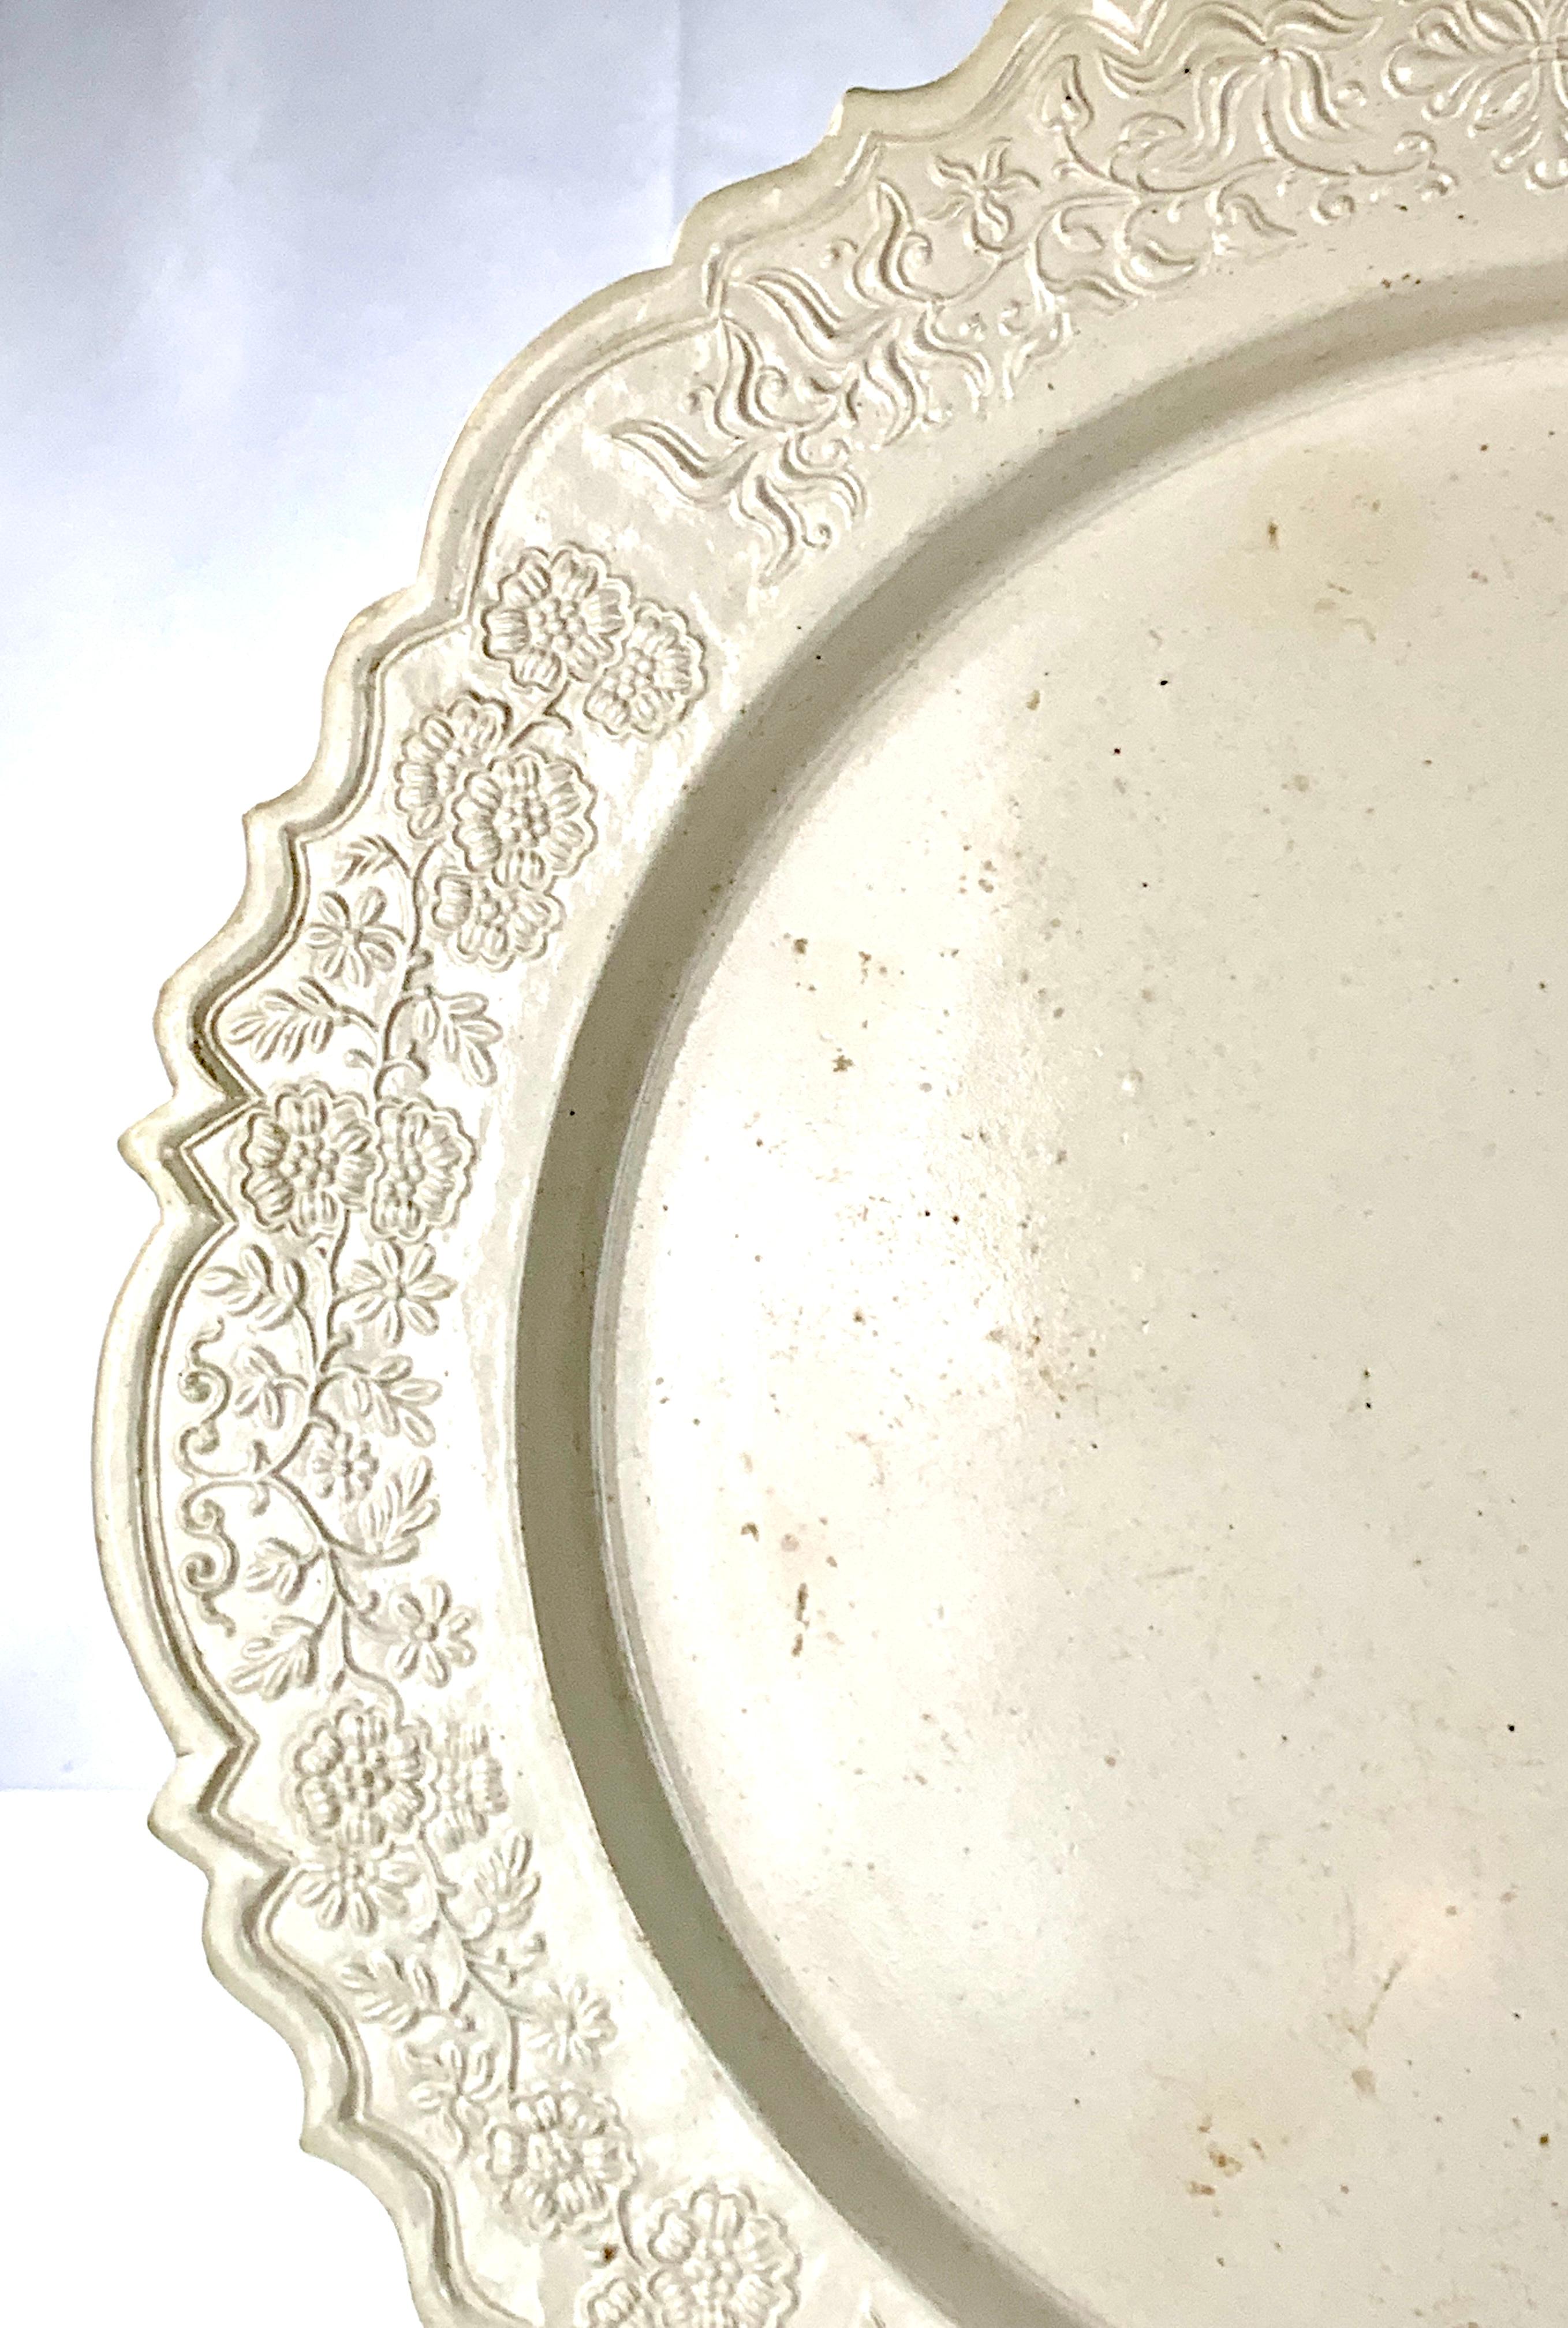 This salt-glazed stoneware charger is an exquisite piece of early Americana.* The floral design on the border is graceful and charming showing a variety of flowers on the vine. It was made in England. In the mid 18th century stoneware was a staple